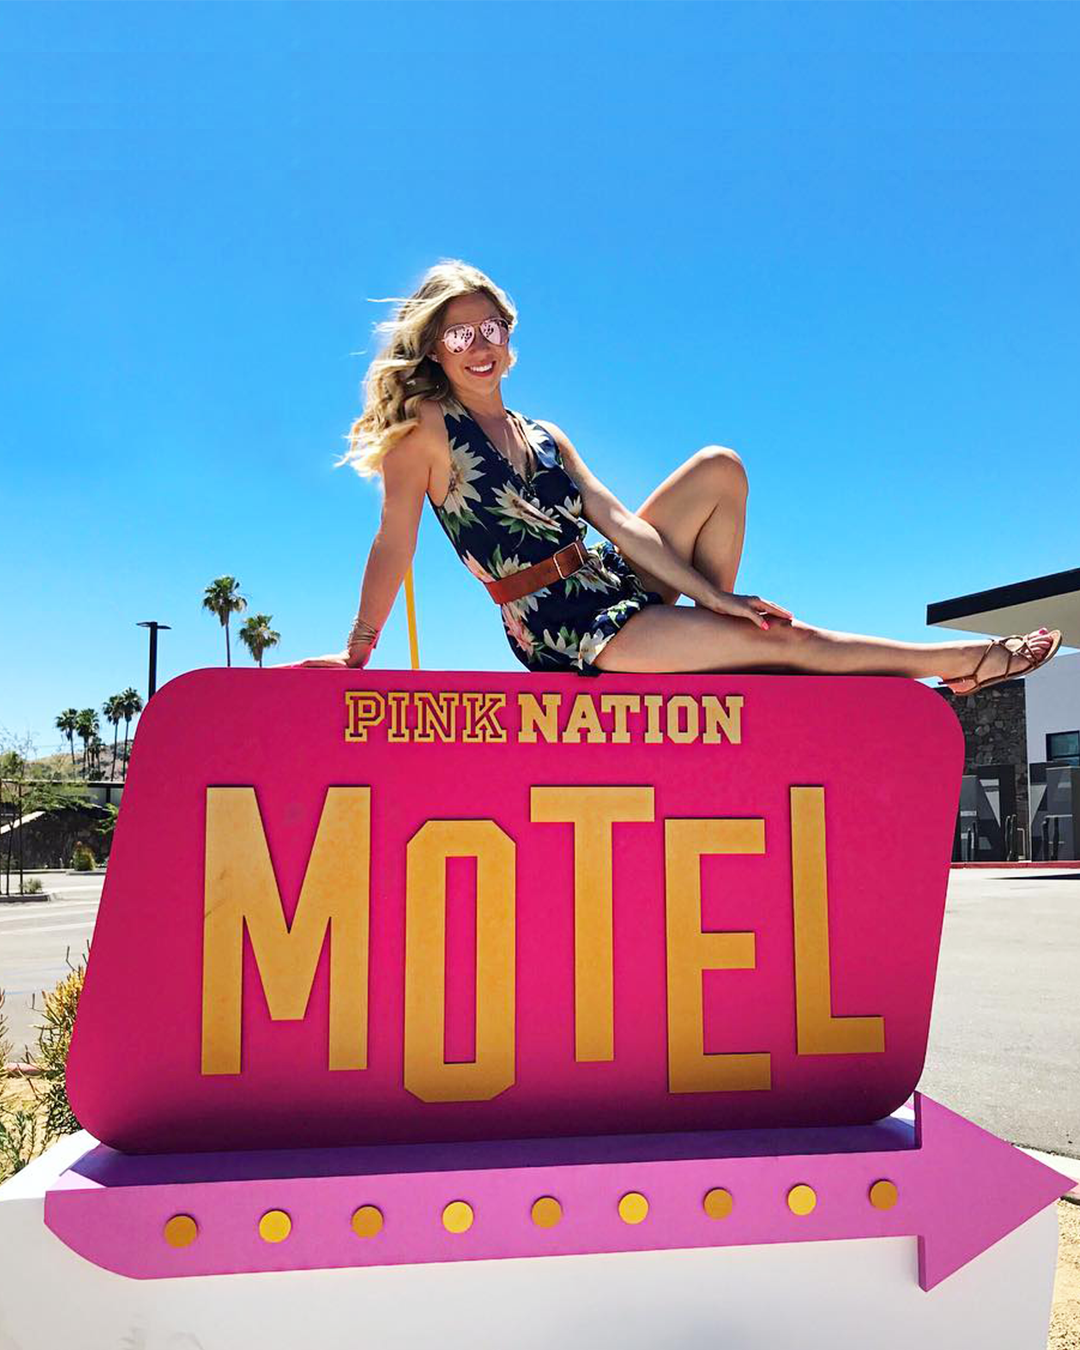 Image of a Blonde haired model sitting on top of got pink sign that reads 